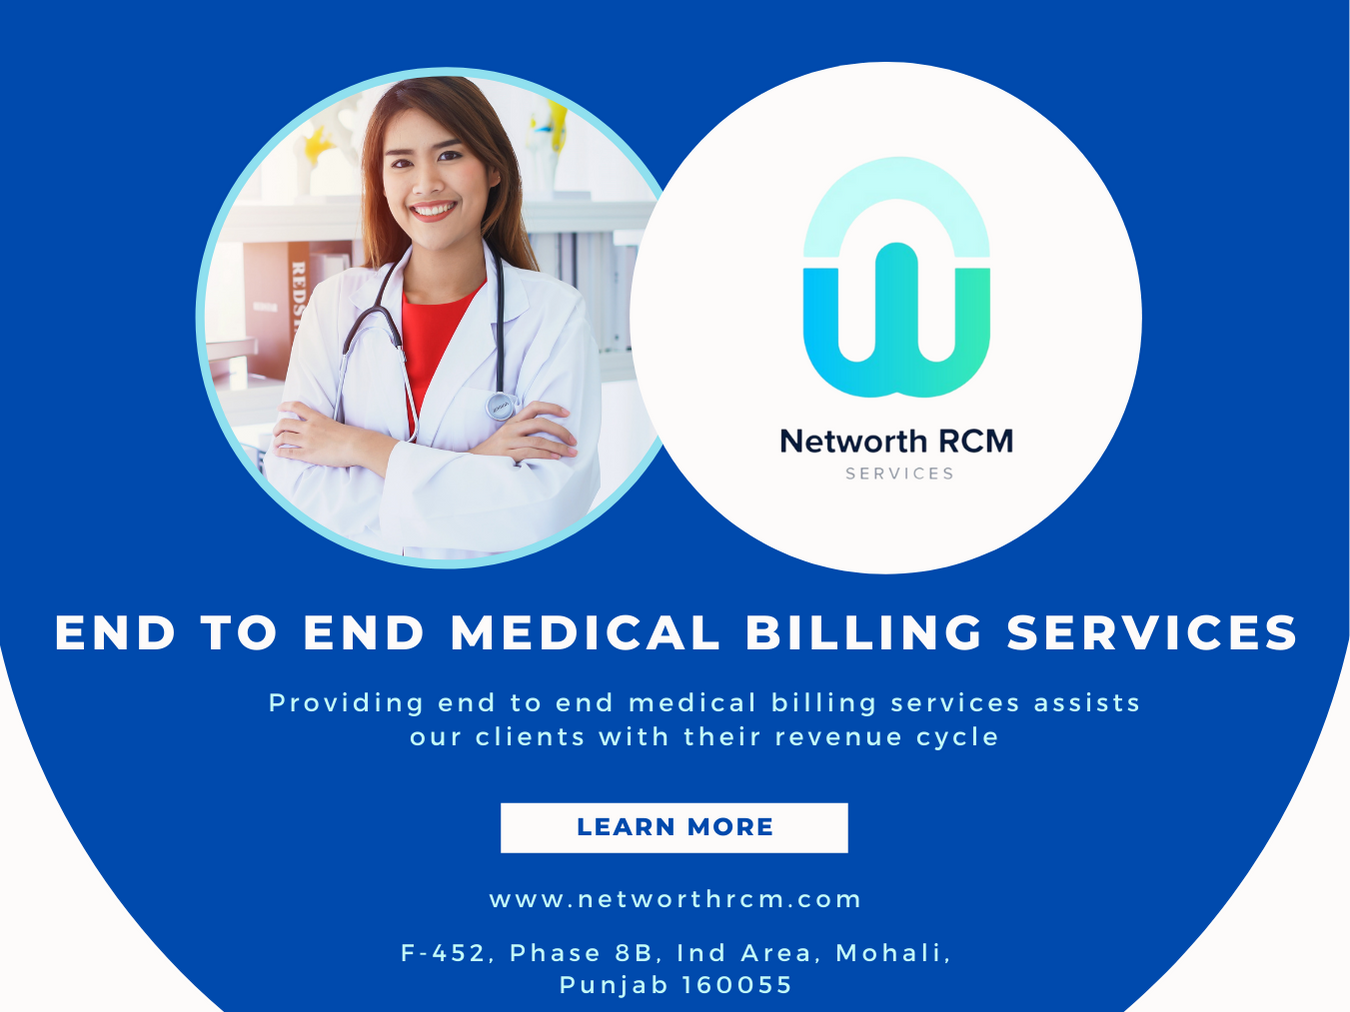 One of the Best Medical Billing Company – Networth RCM